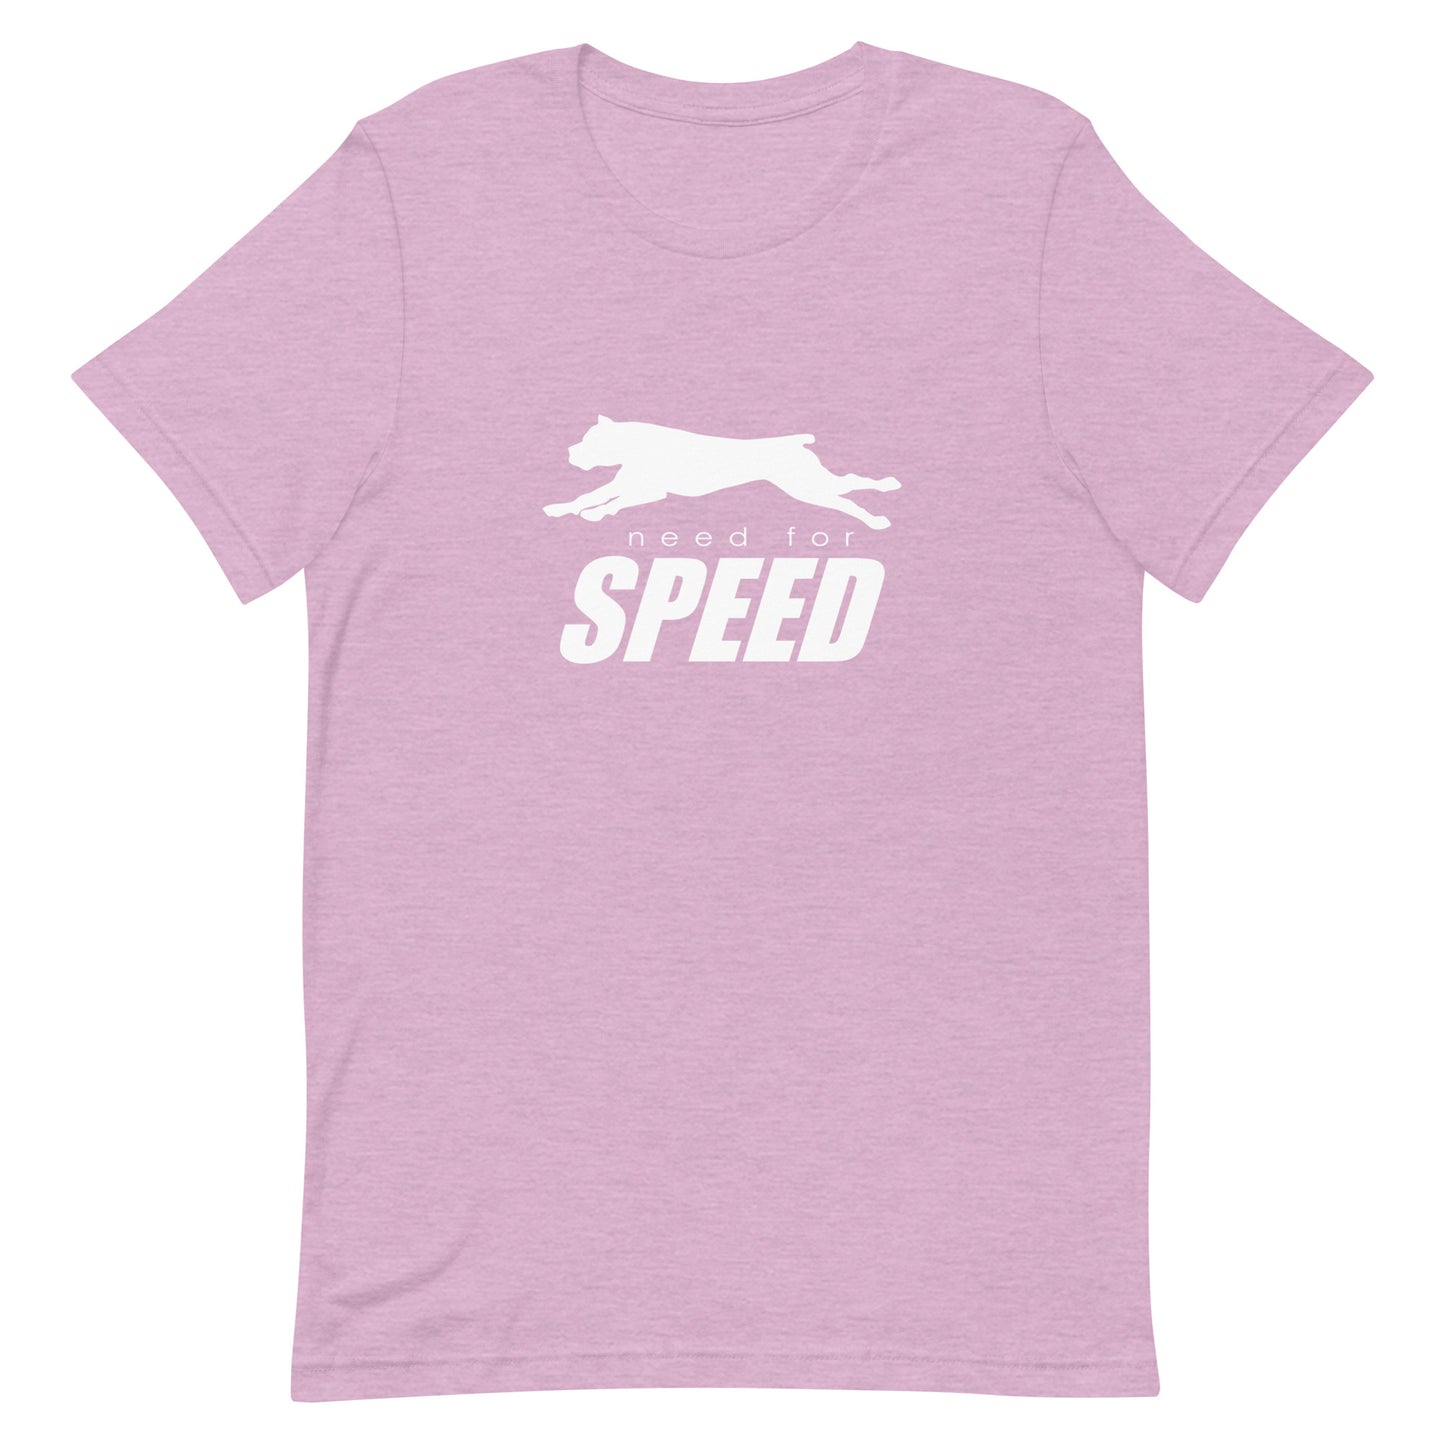 NEED FOR SPEED - CANE CORSO - Unisex t-shirt